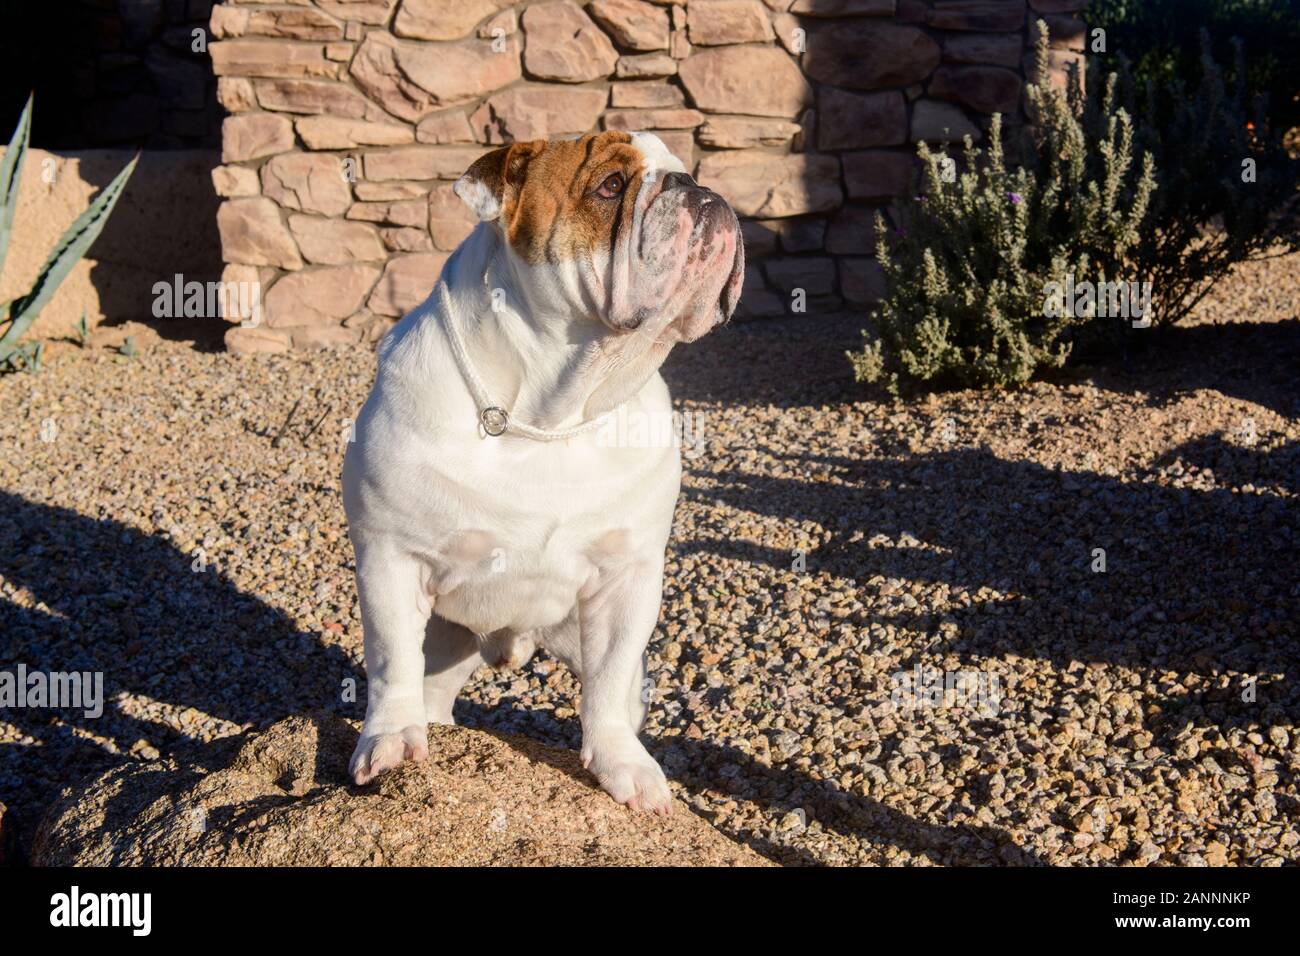 English bulldog in the desert posing on a rock looking up Stock Photo